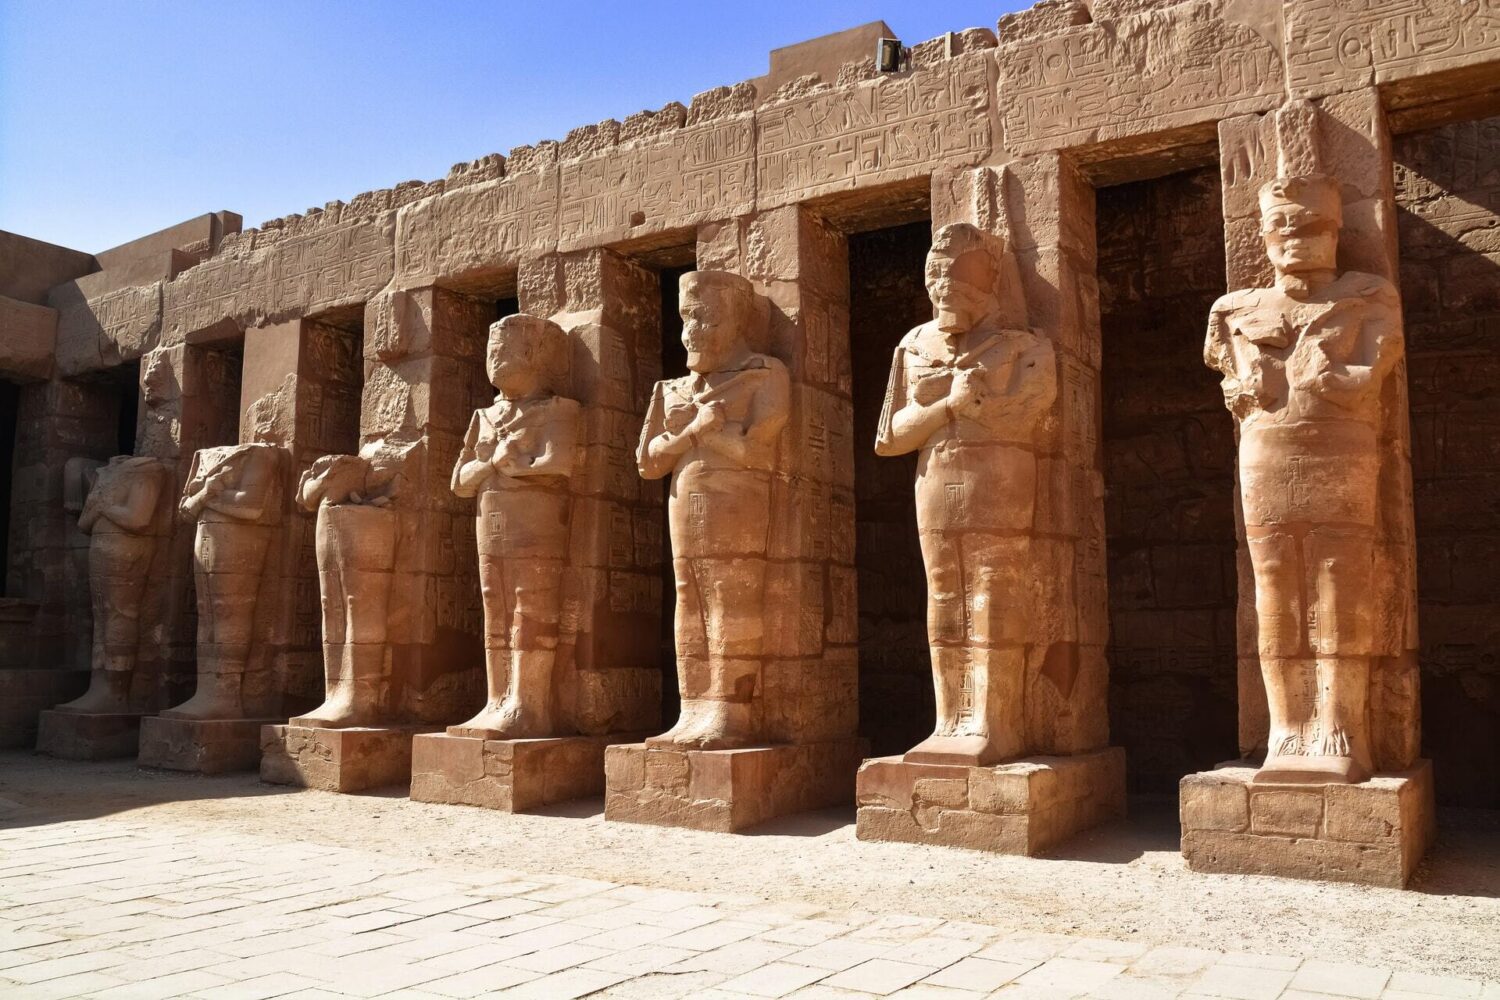 Karnak Temple - Luxor | Ancient Egypt & the Red Sea Tour | Cruise the Nile in Style Tour | Egypt in the Golden Age of Travel Luxury Tour | Essential Egypt Tour | Luxury Tours of Egypt | The Magic of Jordan & Egypt Tour | James bond in Egypt Tour